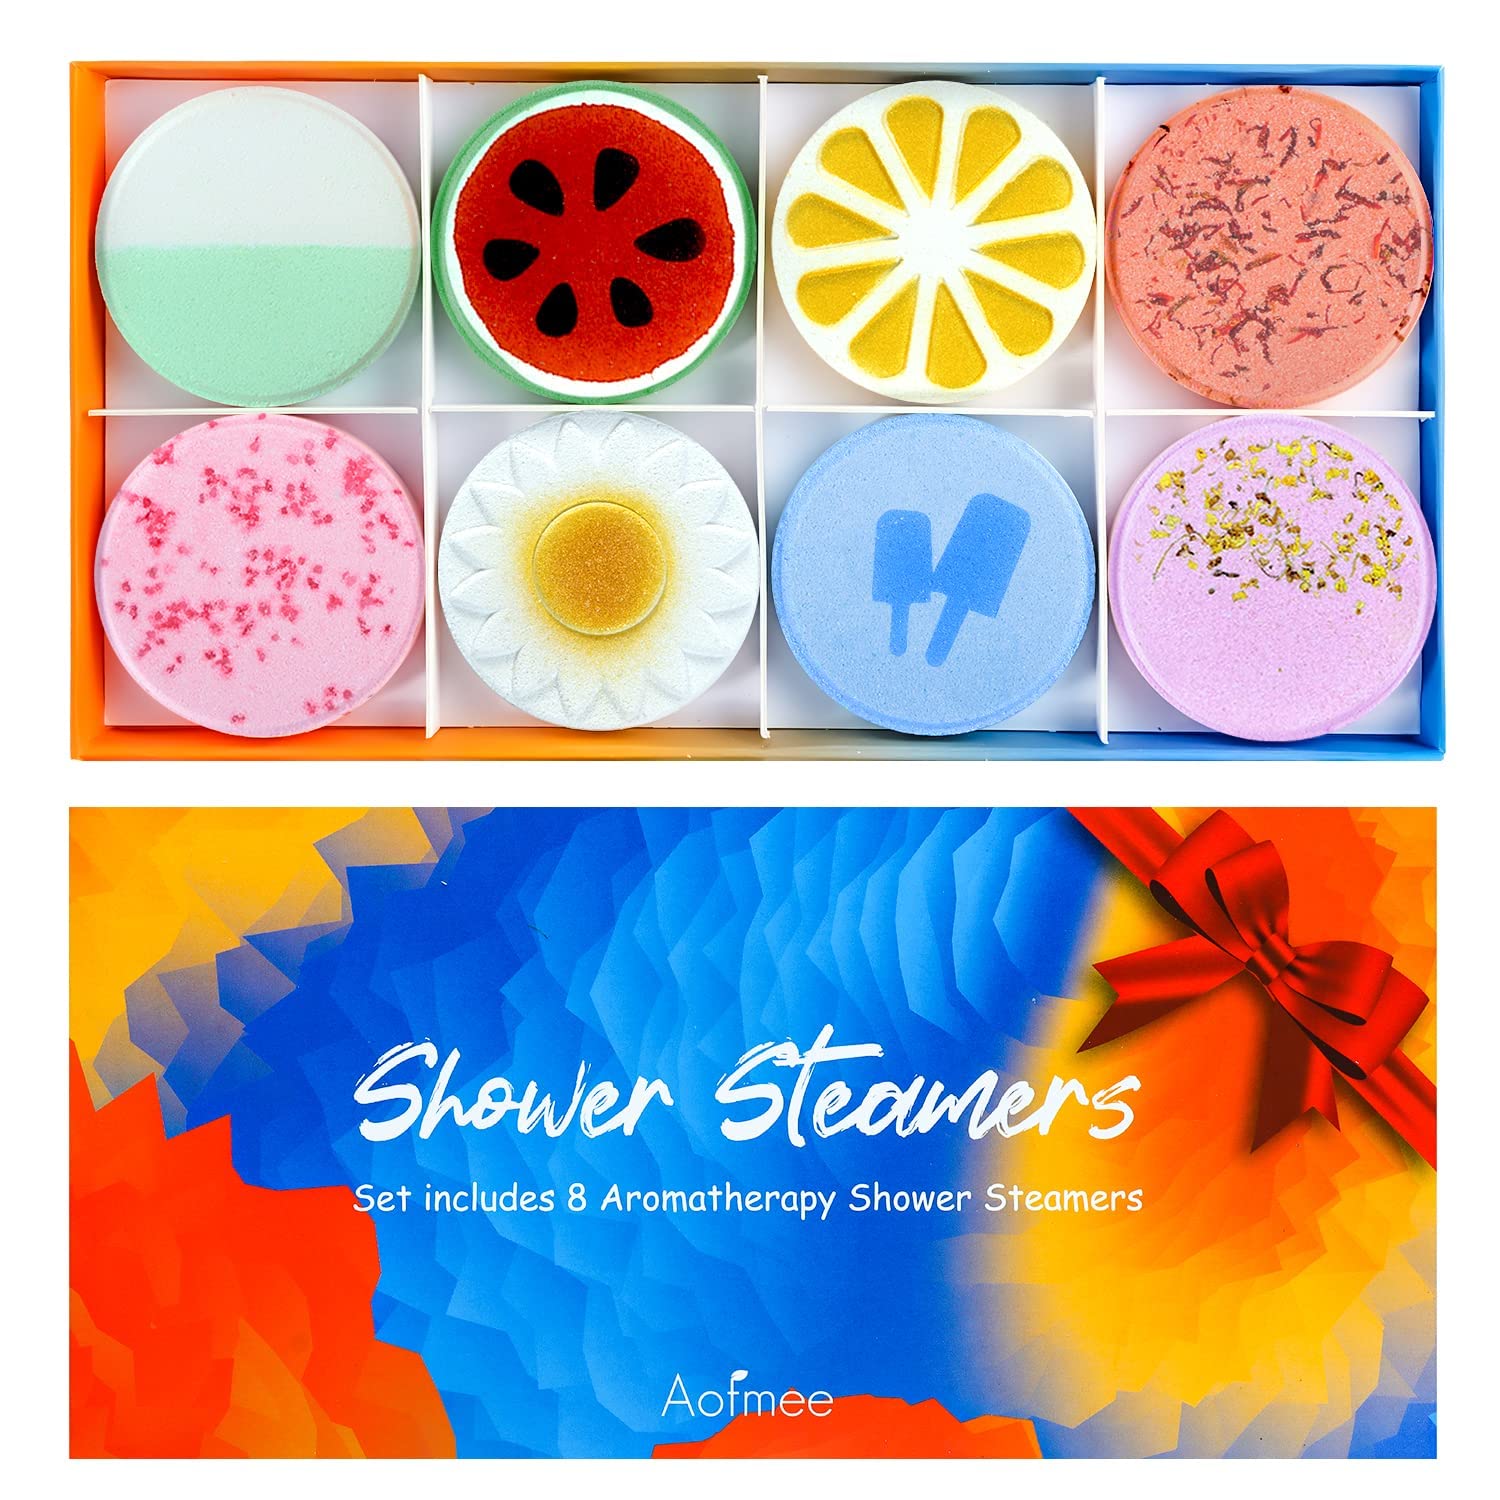 Aofmee Shower Steamers Aromatherapy - Pack of 8 Shower Bombs with Essential Oils, Valentines Day Gifts Relaxation Birthday Gifts for Women and Men, Stress Relief and Luxury Self Care Shower Bath Bombs 